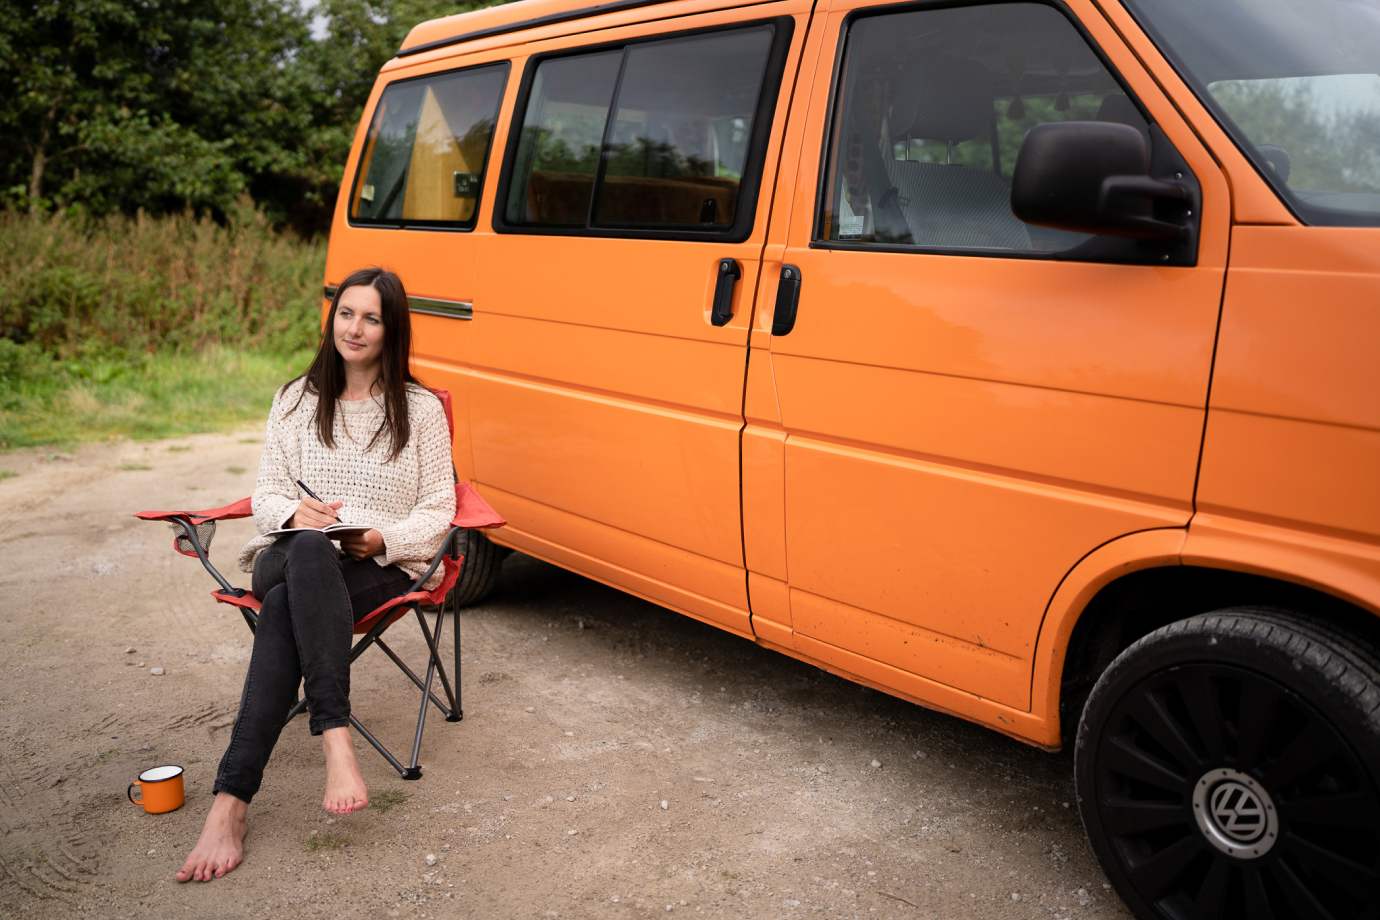 Charlotte sits in a camping chair with a pan and notepad near the orange campervan.